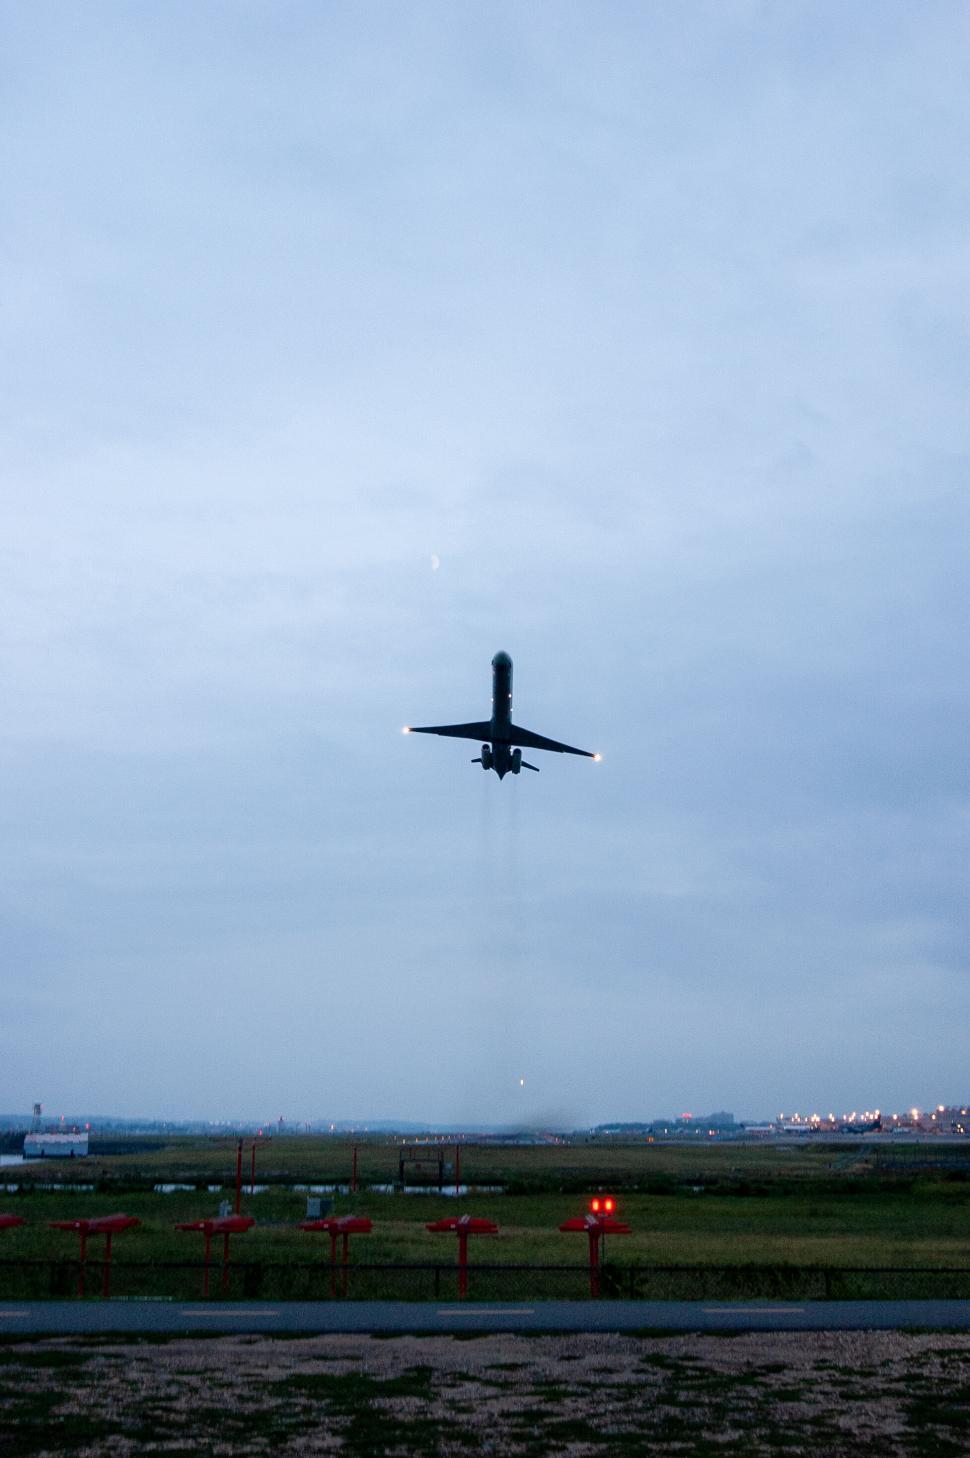 Free Image of Airplane descending against evening sky 